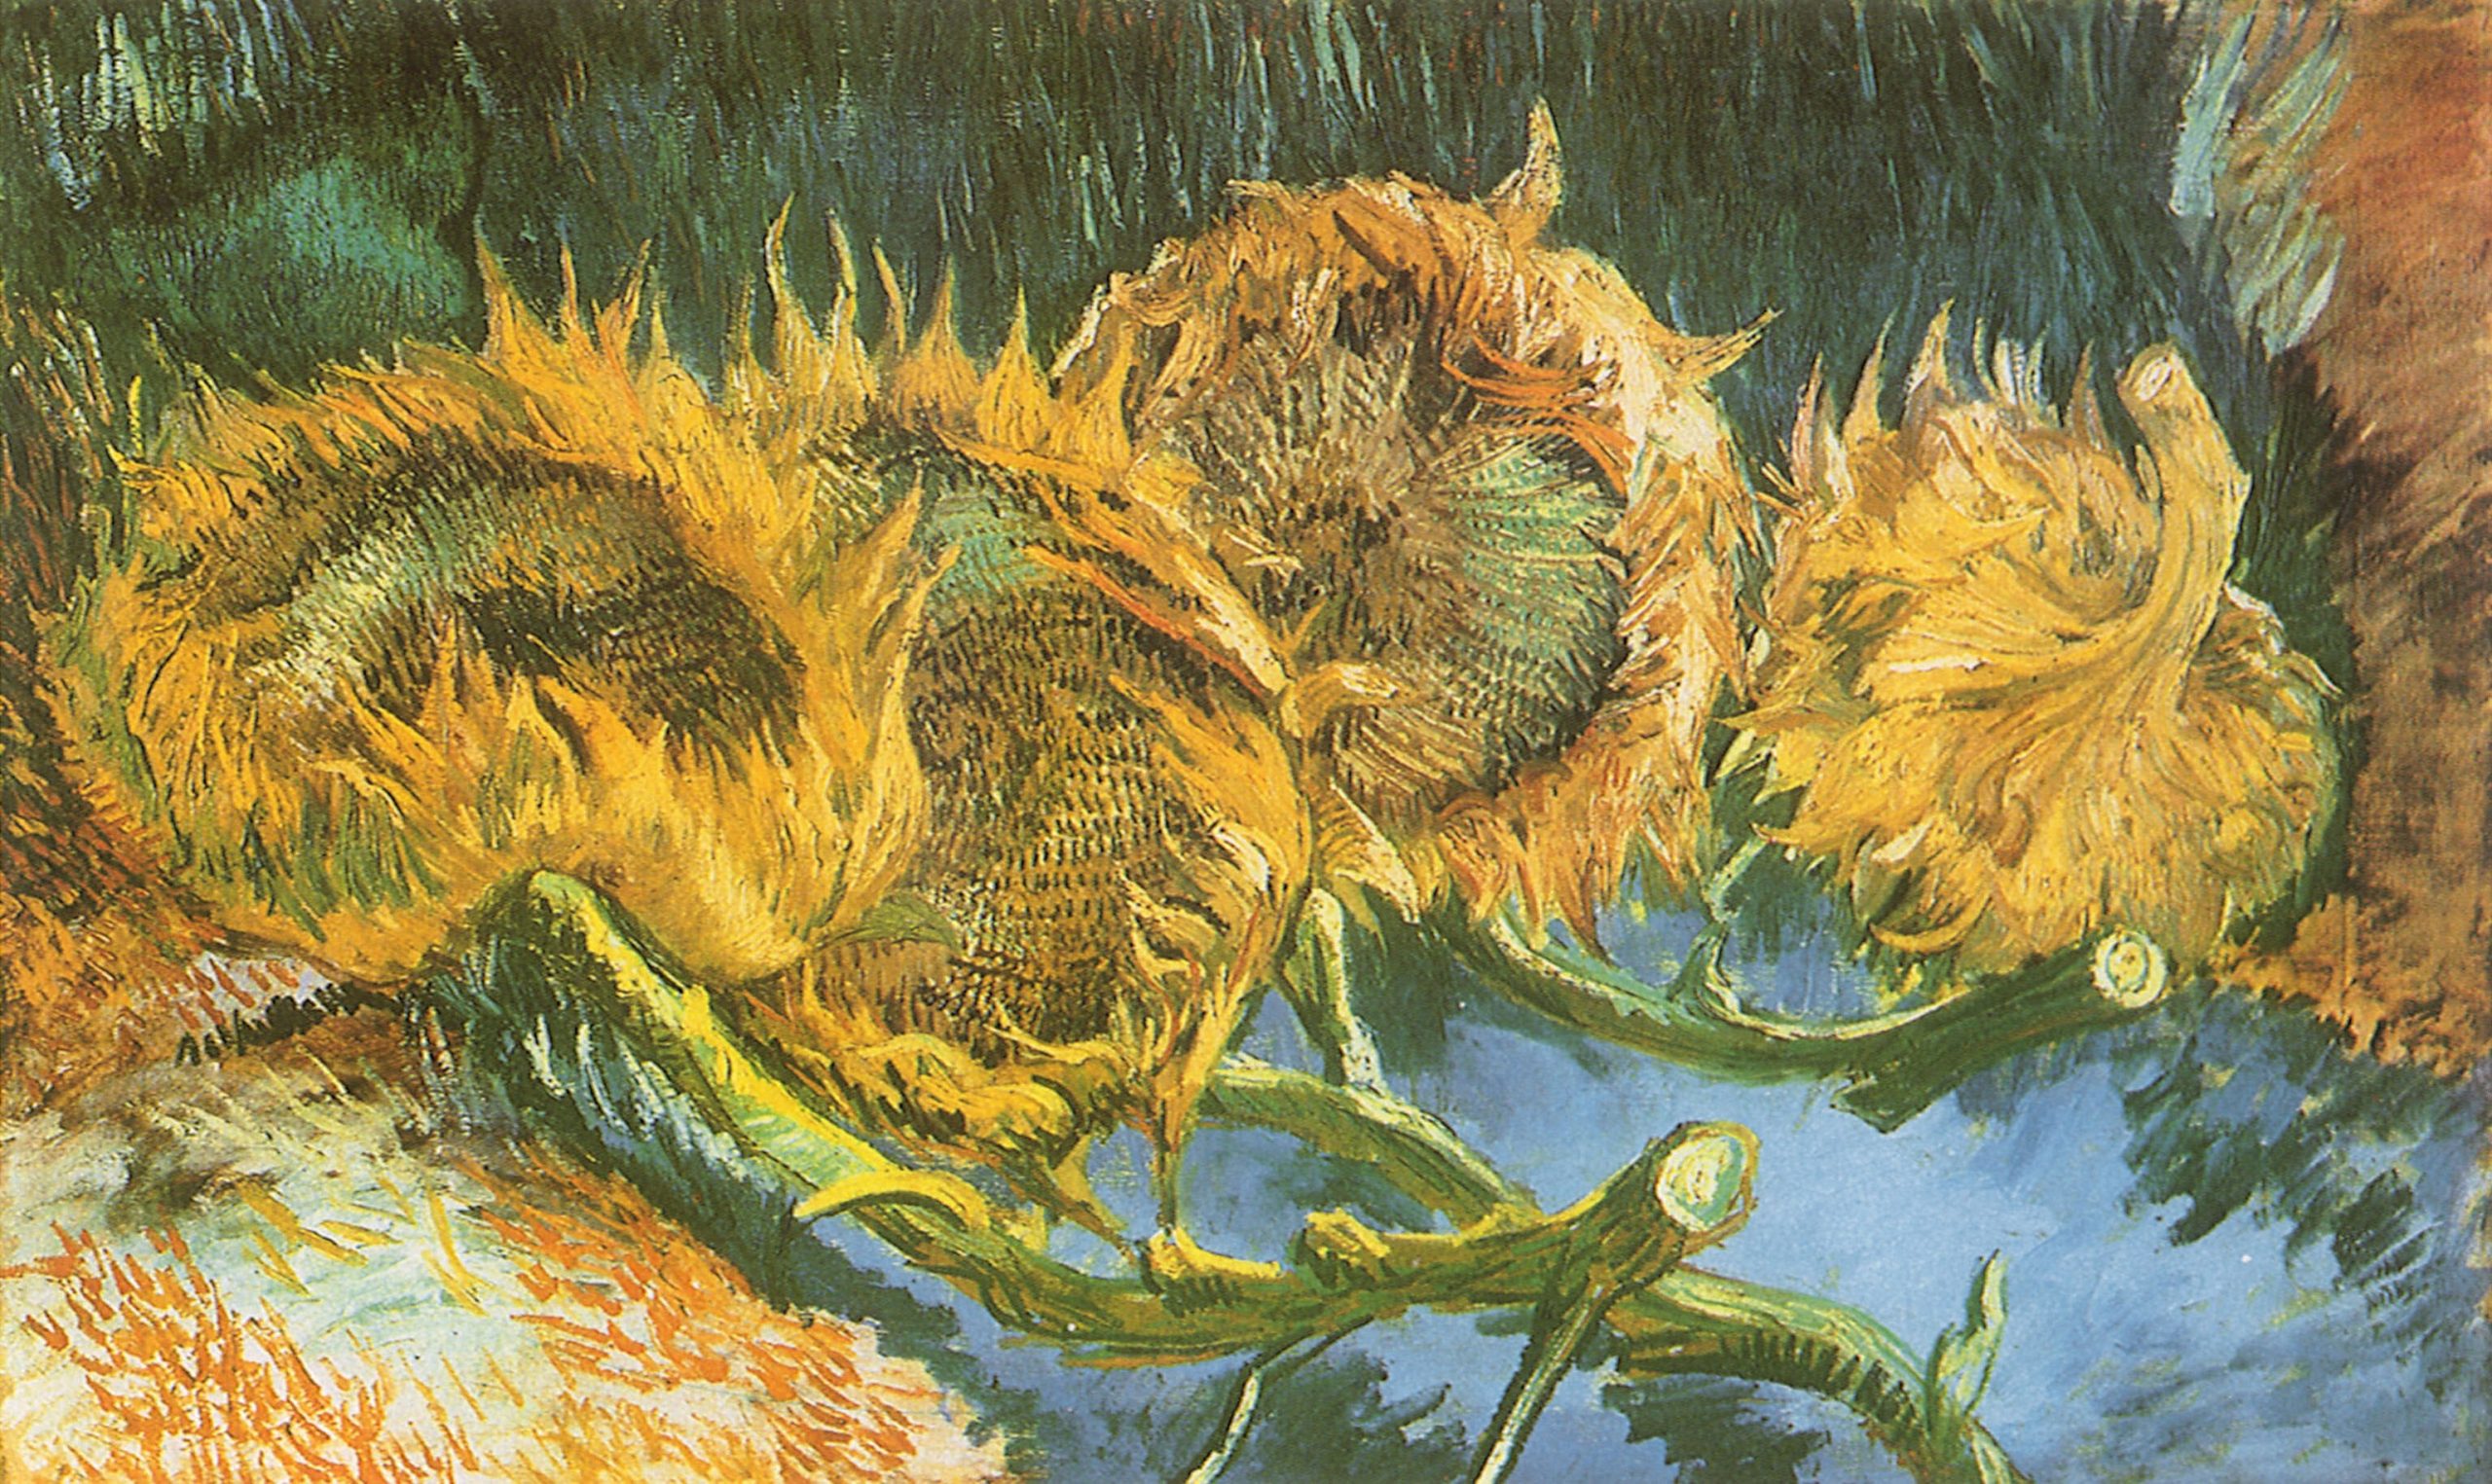 Green and yellow flower painting wallpaper, artwork, Vincent van Gogh, sunflowers